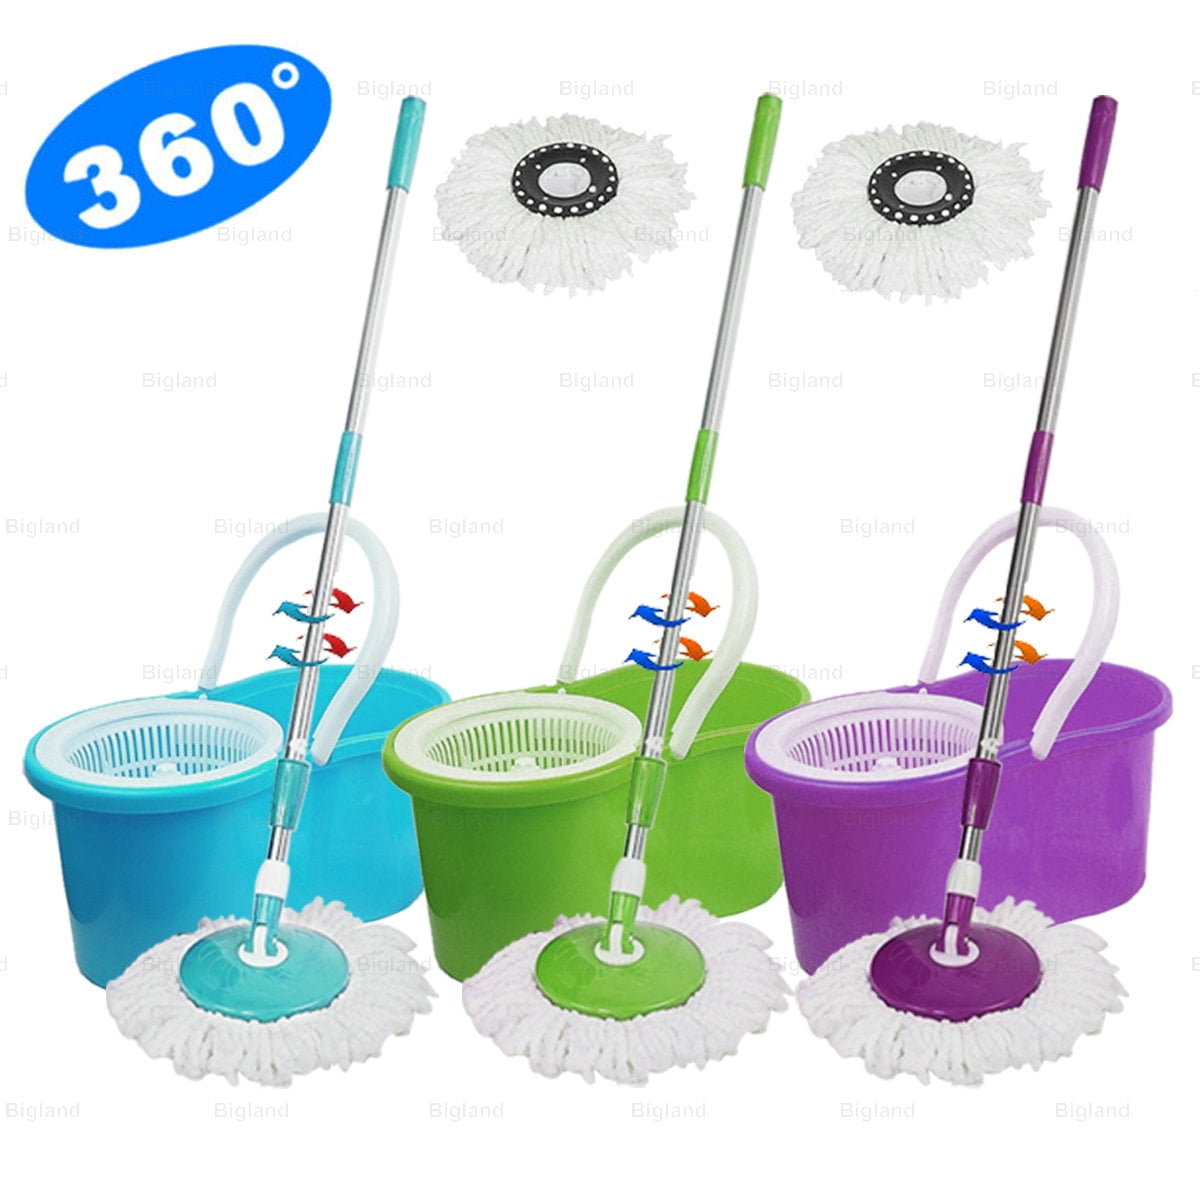 360° Easy Clean Floor Spin Spining Mop 3x Microfiber Rotating Heads Replacement 